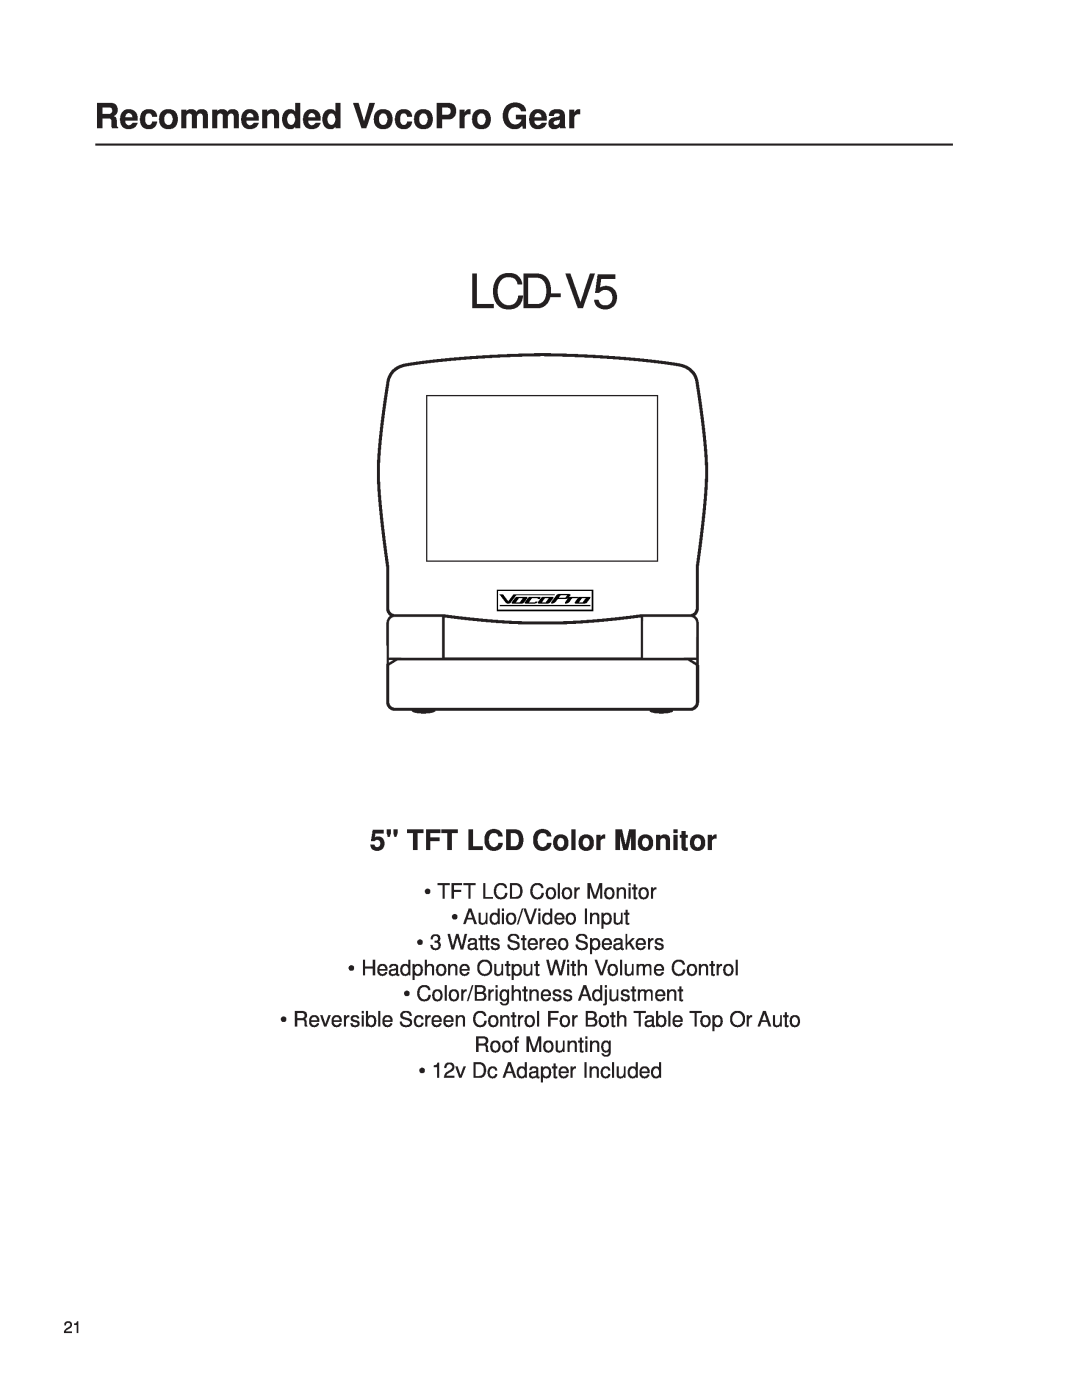 VocoPro DA-3600Pro2 owner manual LCD-V5, TFT LCD Color Monitor, Recommended VocoPro Gear 